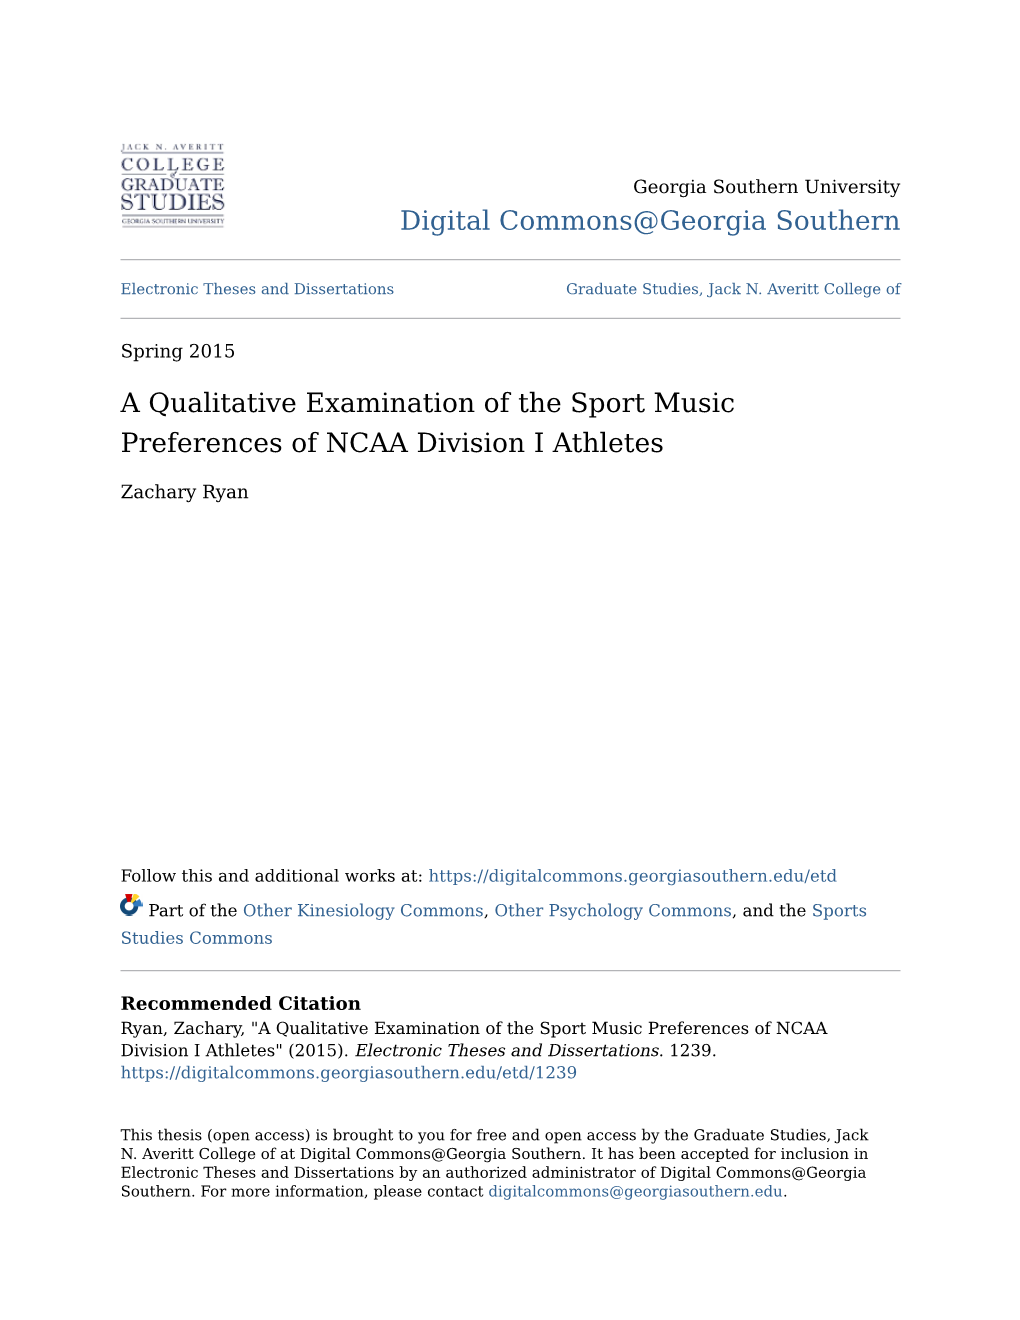 A Qualitative Examination of the Sport Music Preferences of NCAA Division I Athletes